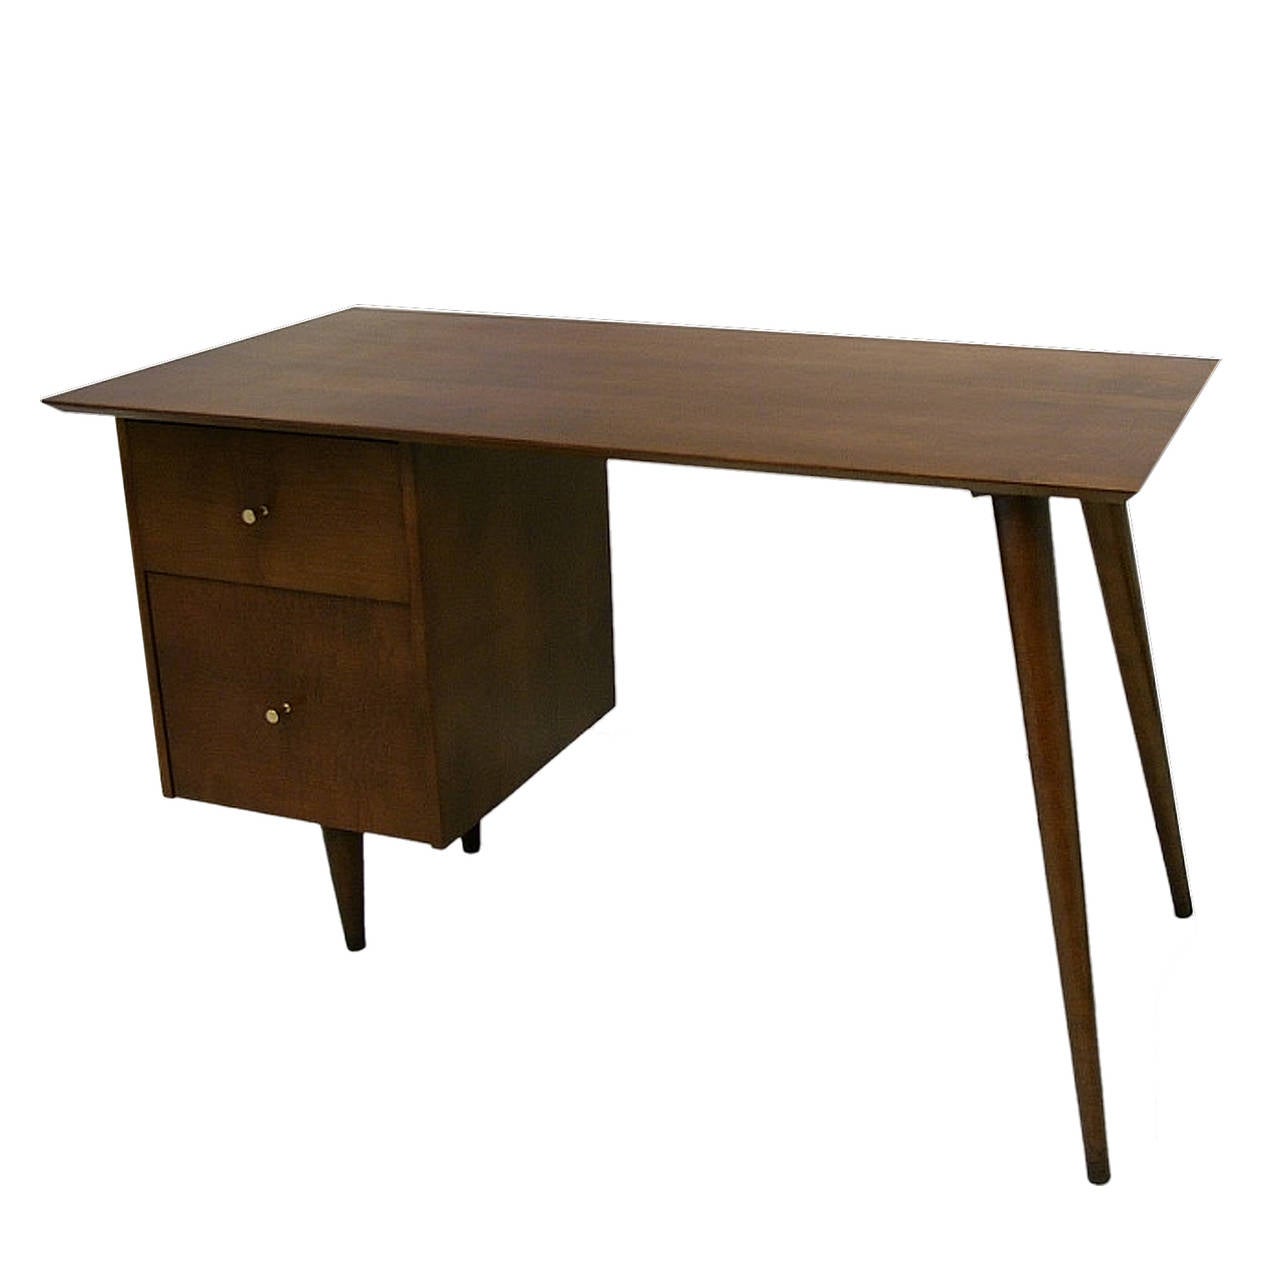 Stylish midcentury desk from Paul McCobb's Planner Group. Stunning, yet simple and functional design. Constructed of solid maple with a walnut stain. Excellent condition.